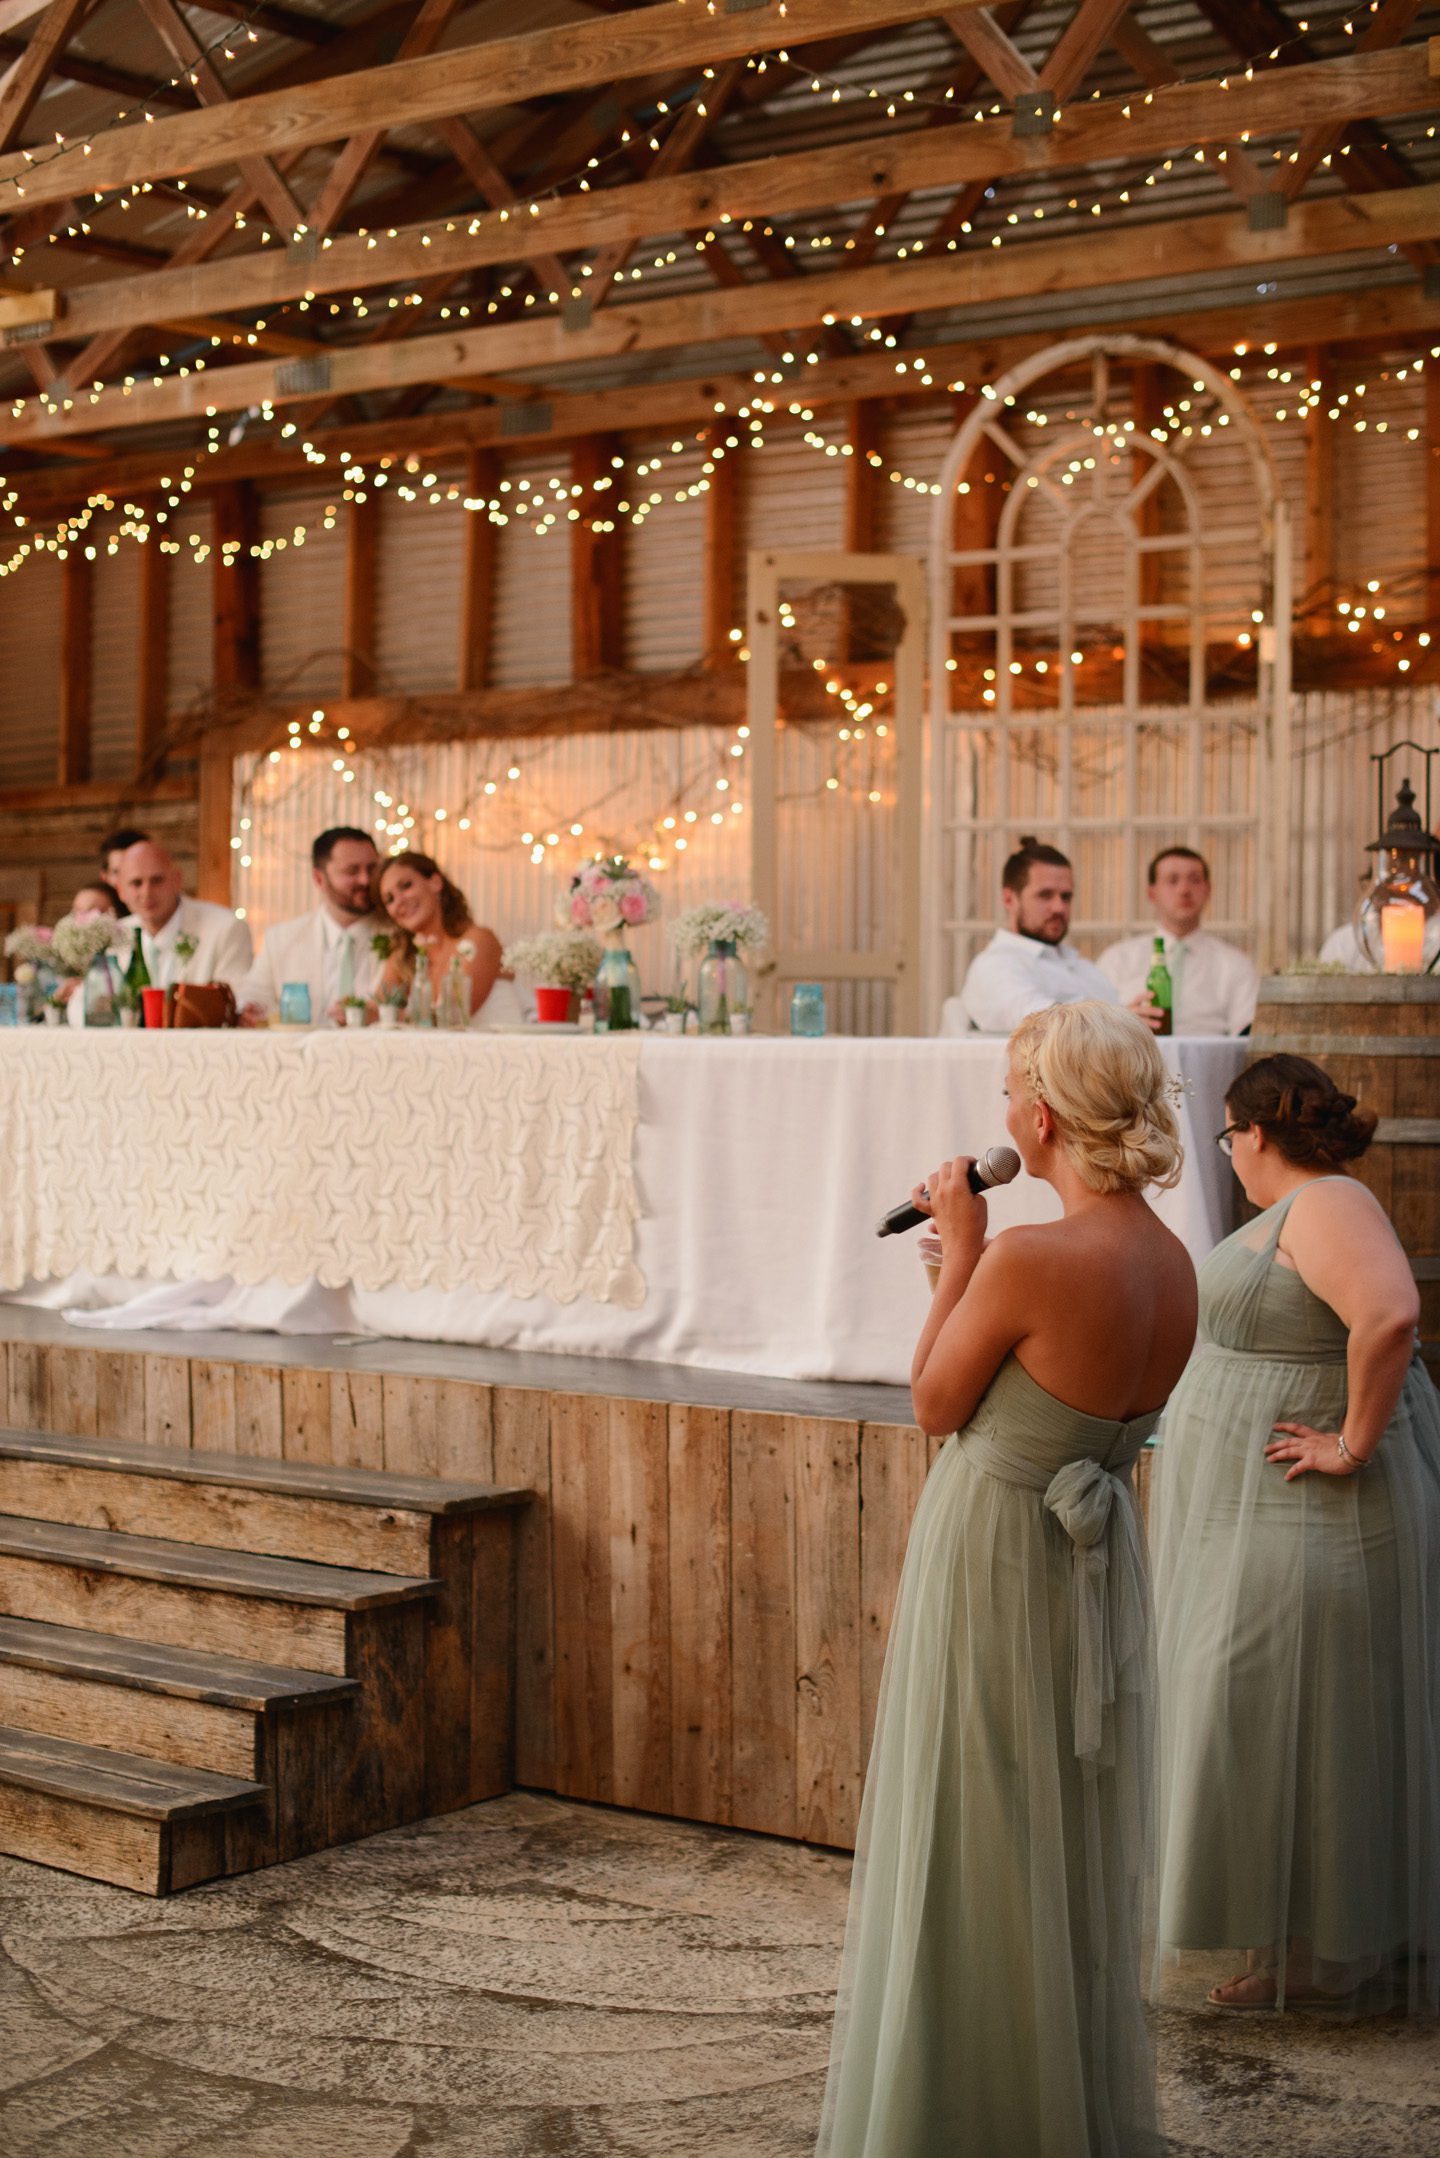 Kelly and Nathan by Neil GT Photography Sinkland Farms Christiansburg VA Wedding Toasts